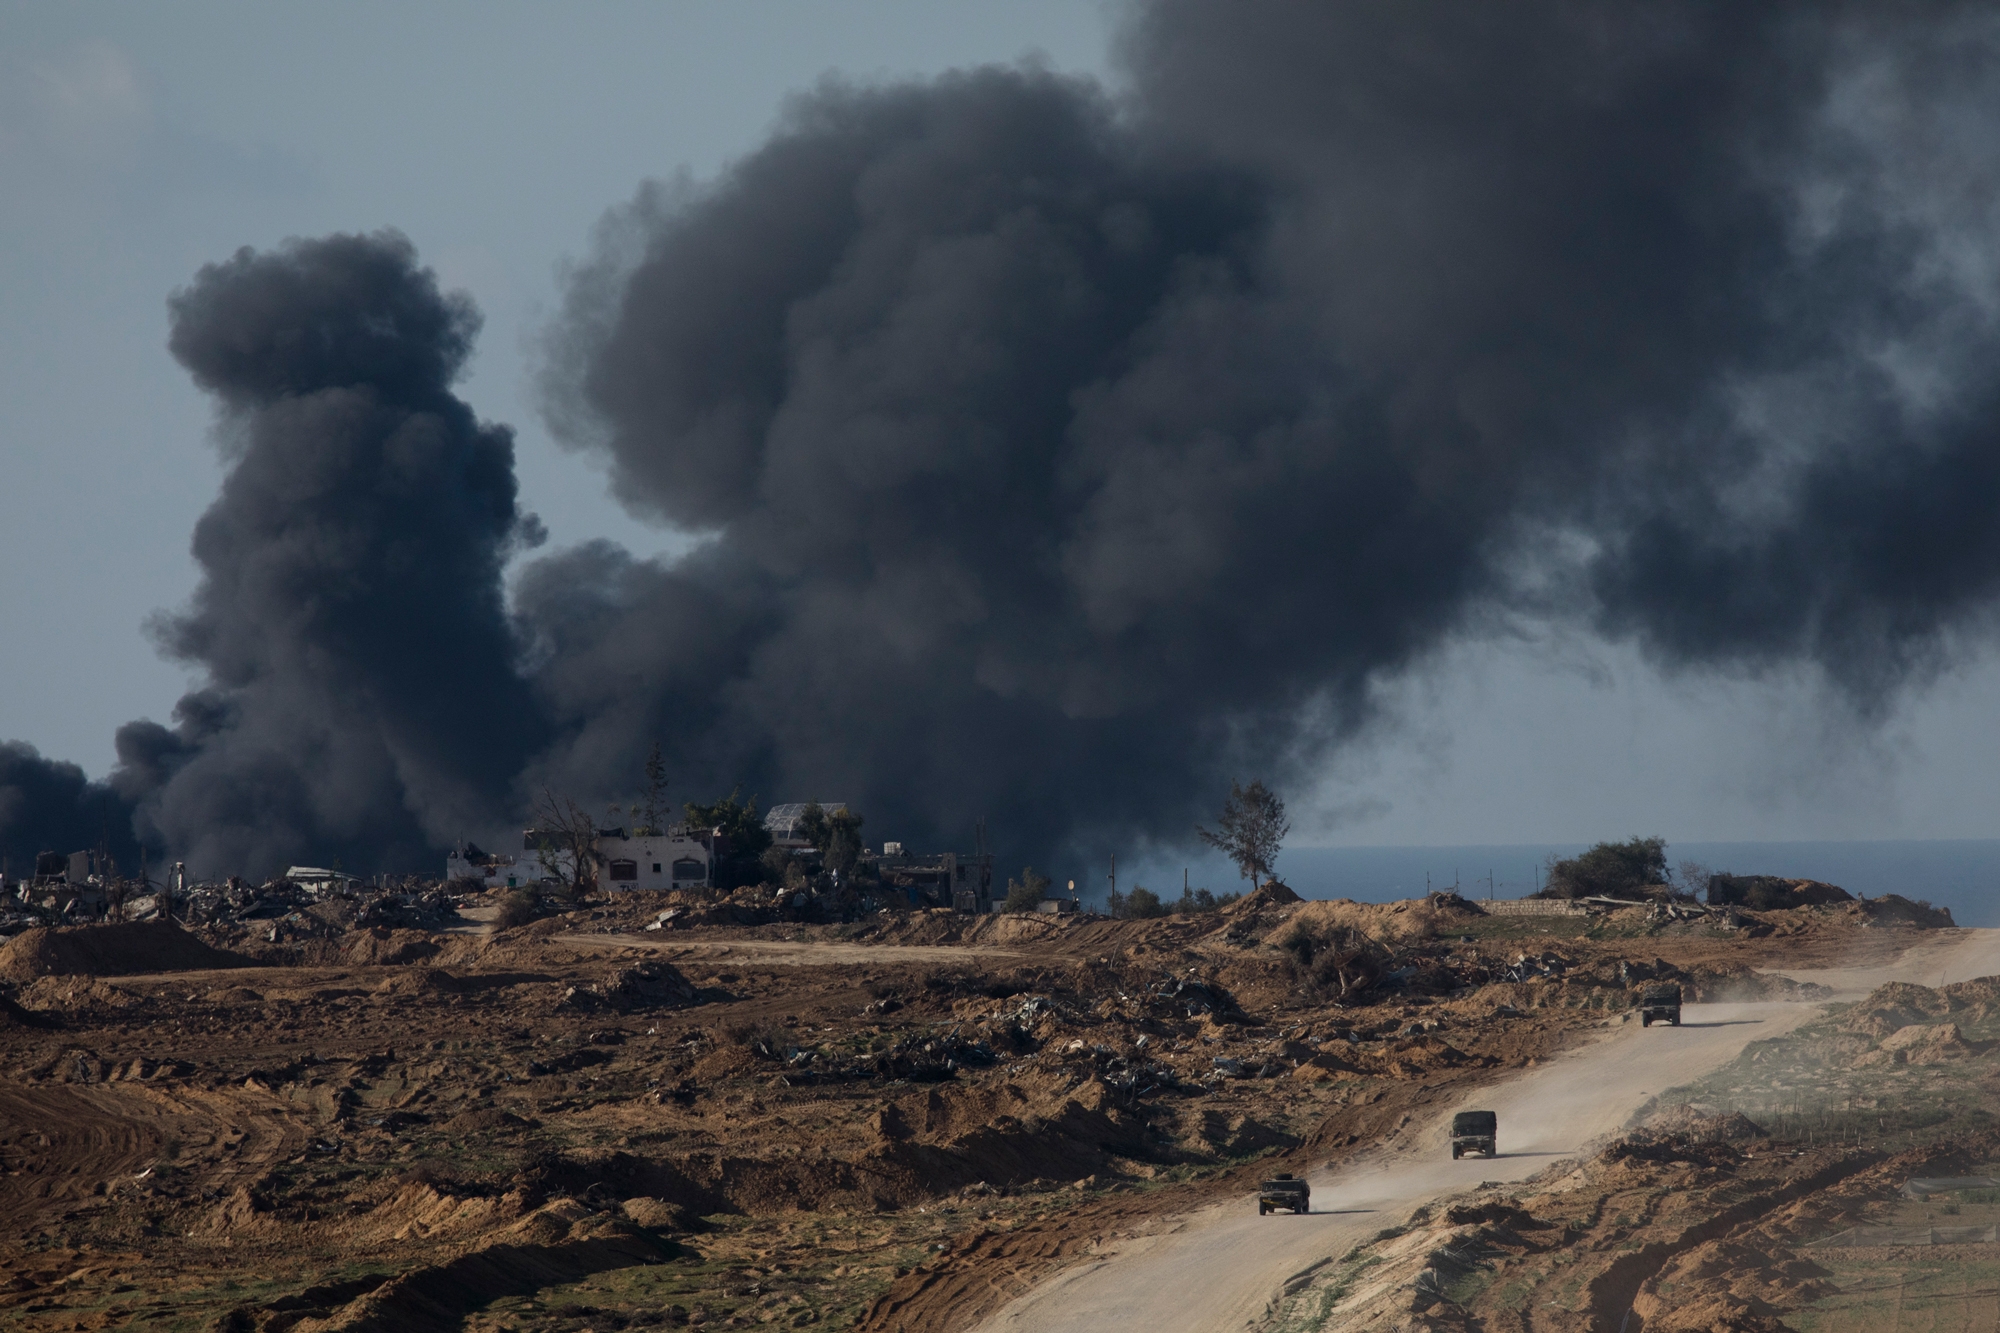 Israeli troops move out of Gaza as smoke rises during Israeli bombardment as seen from the Israeli side of the border on January 5, in southern Israel.